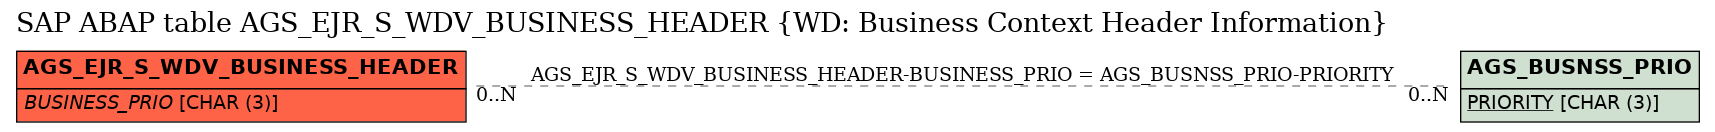 E-R Diagram for table AGS_EJR_S_WDV_BUSINESS_HEADER (WD: Business Context Header Information)